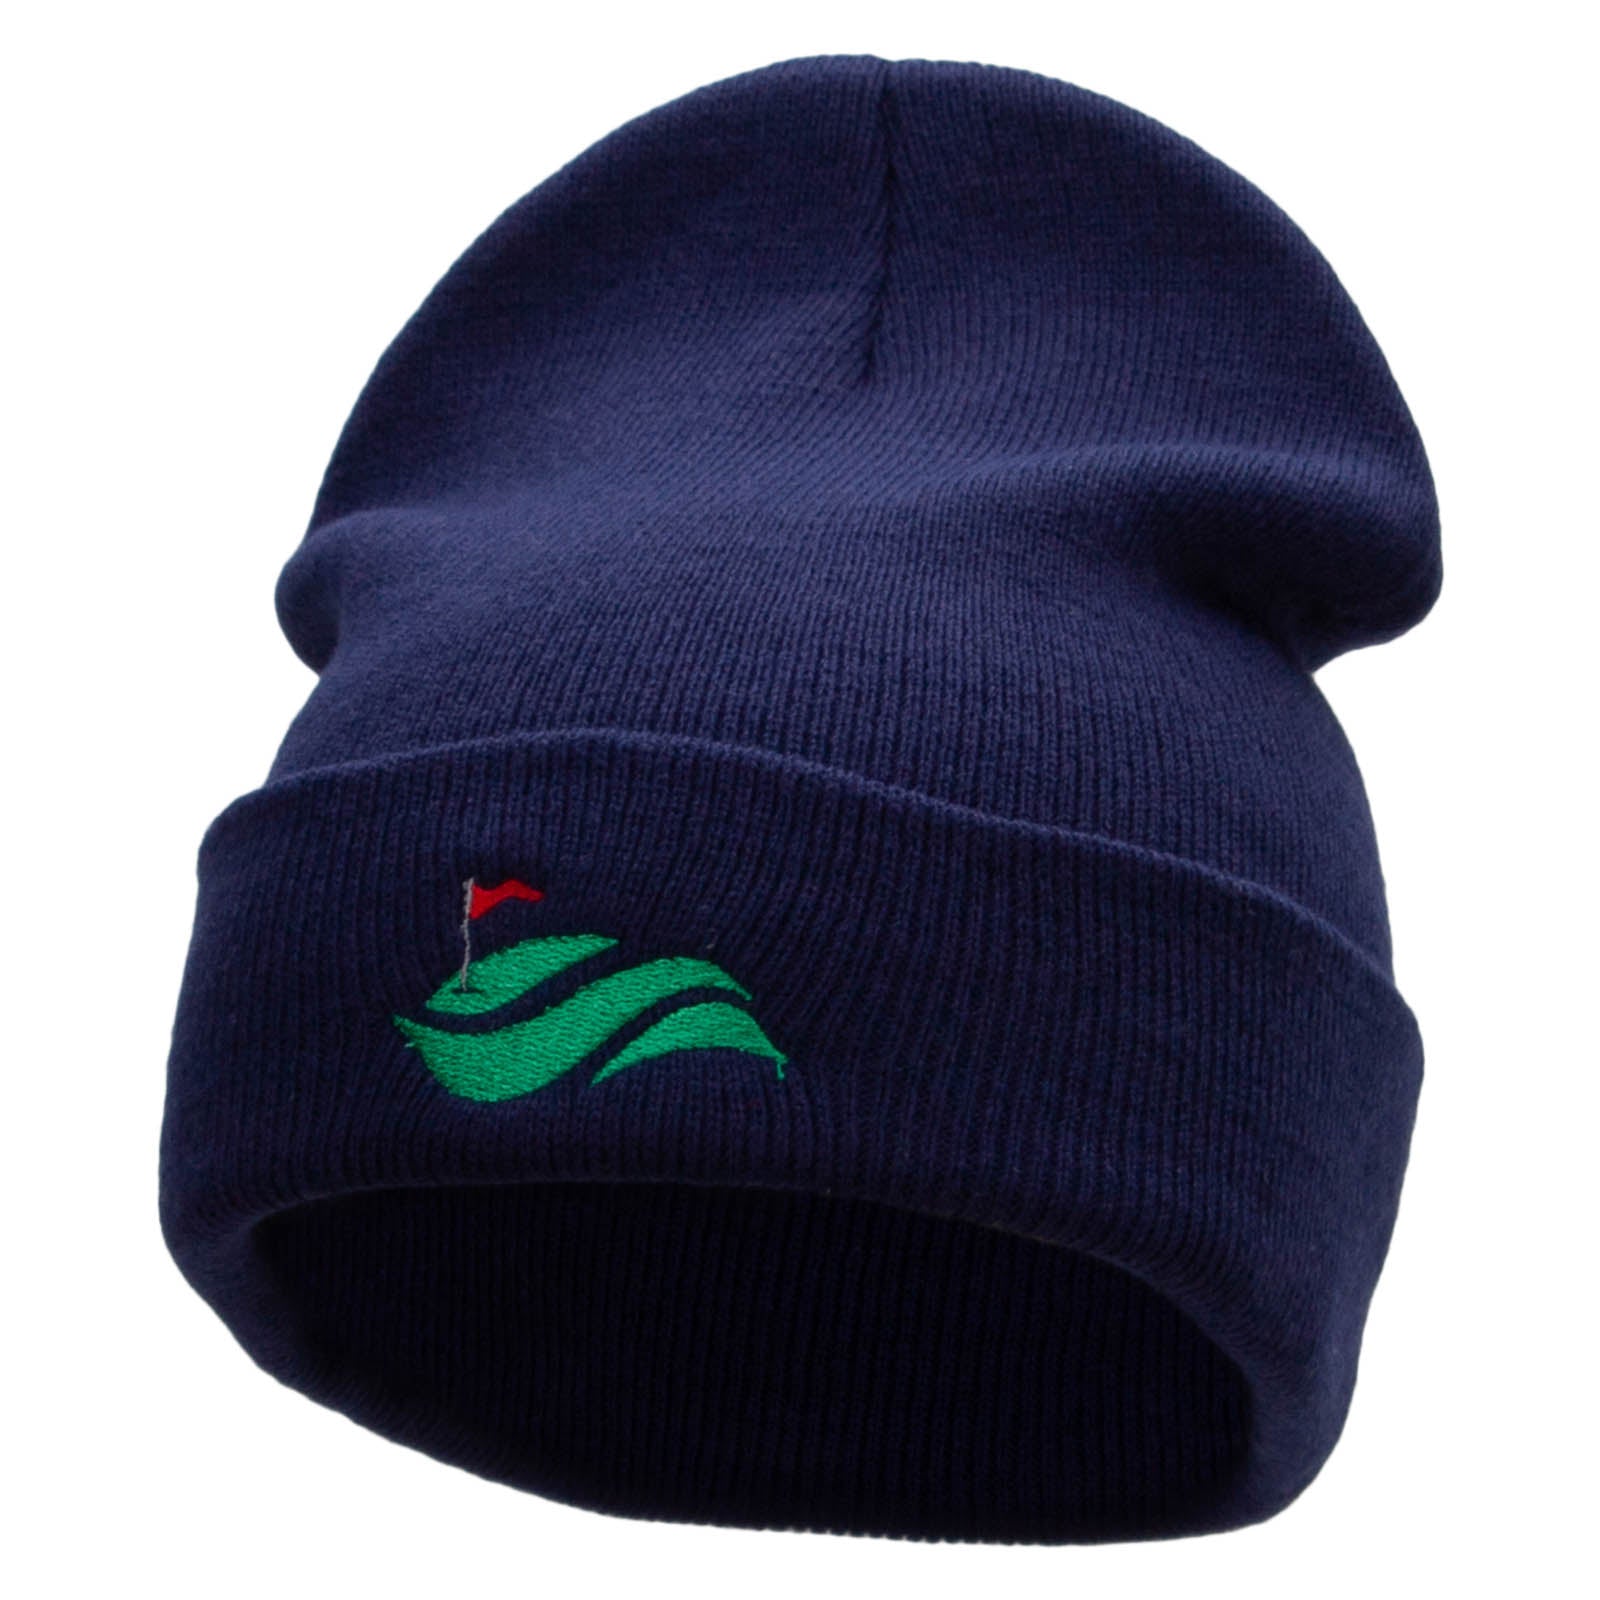 Golf Cup and Greens Embroidered 12 inch Acrylic Cuffed Long Beanie - Navy OSFM